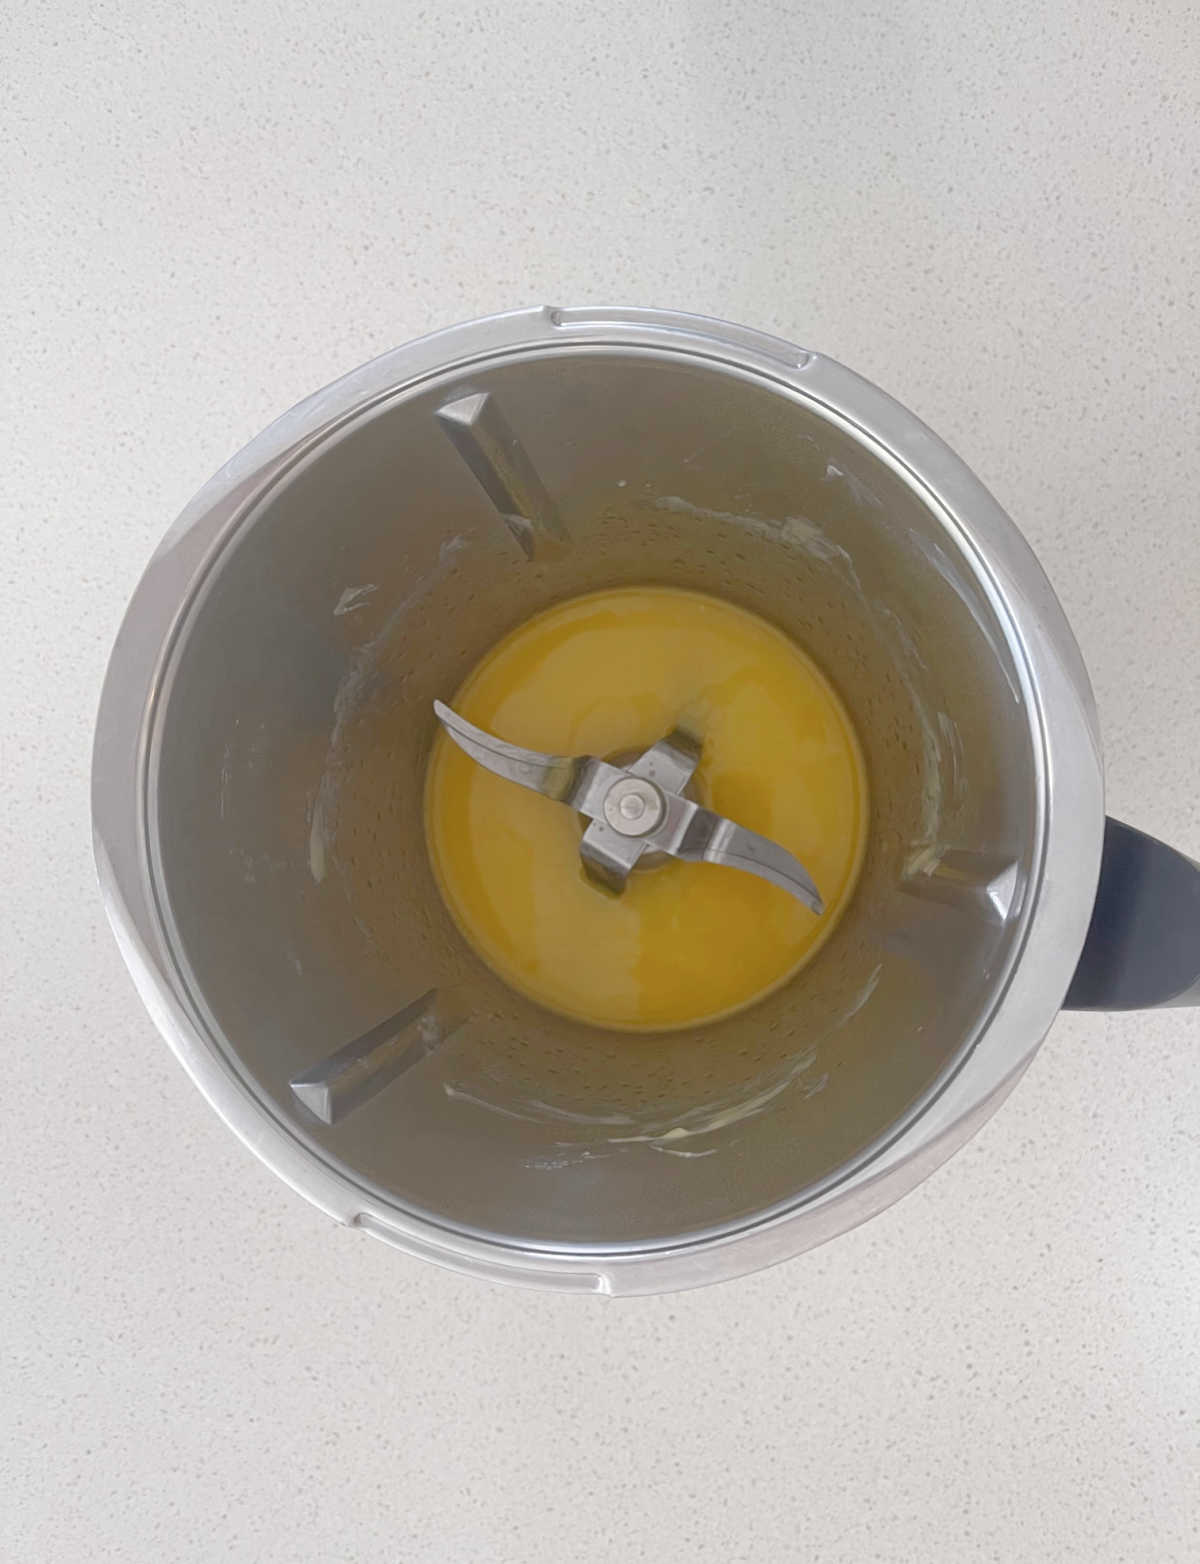 melted butter in a thermomix bowl.